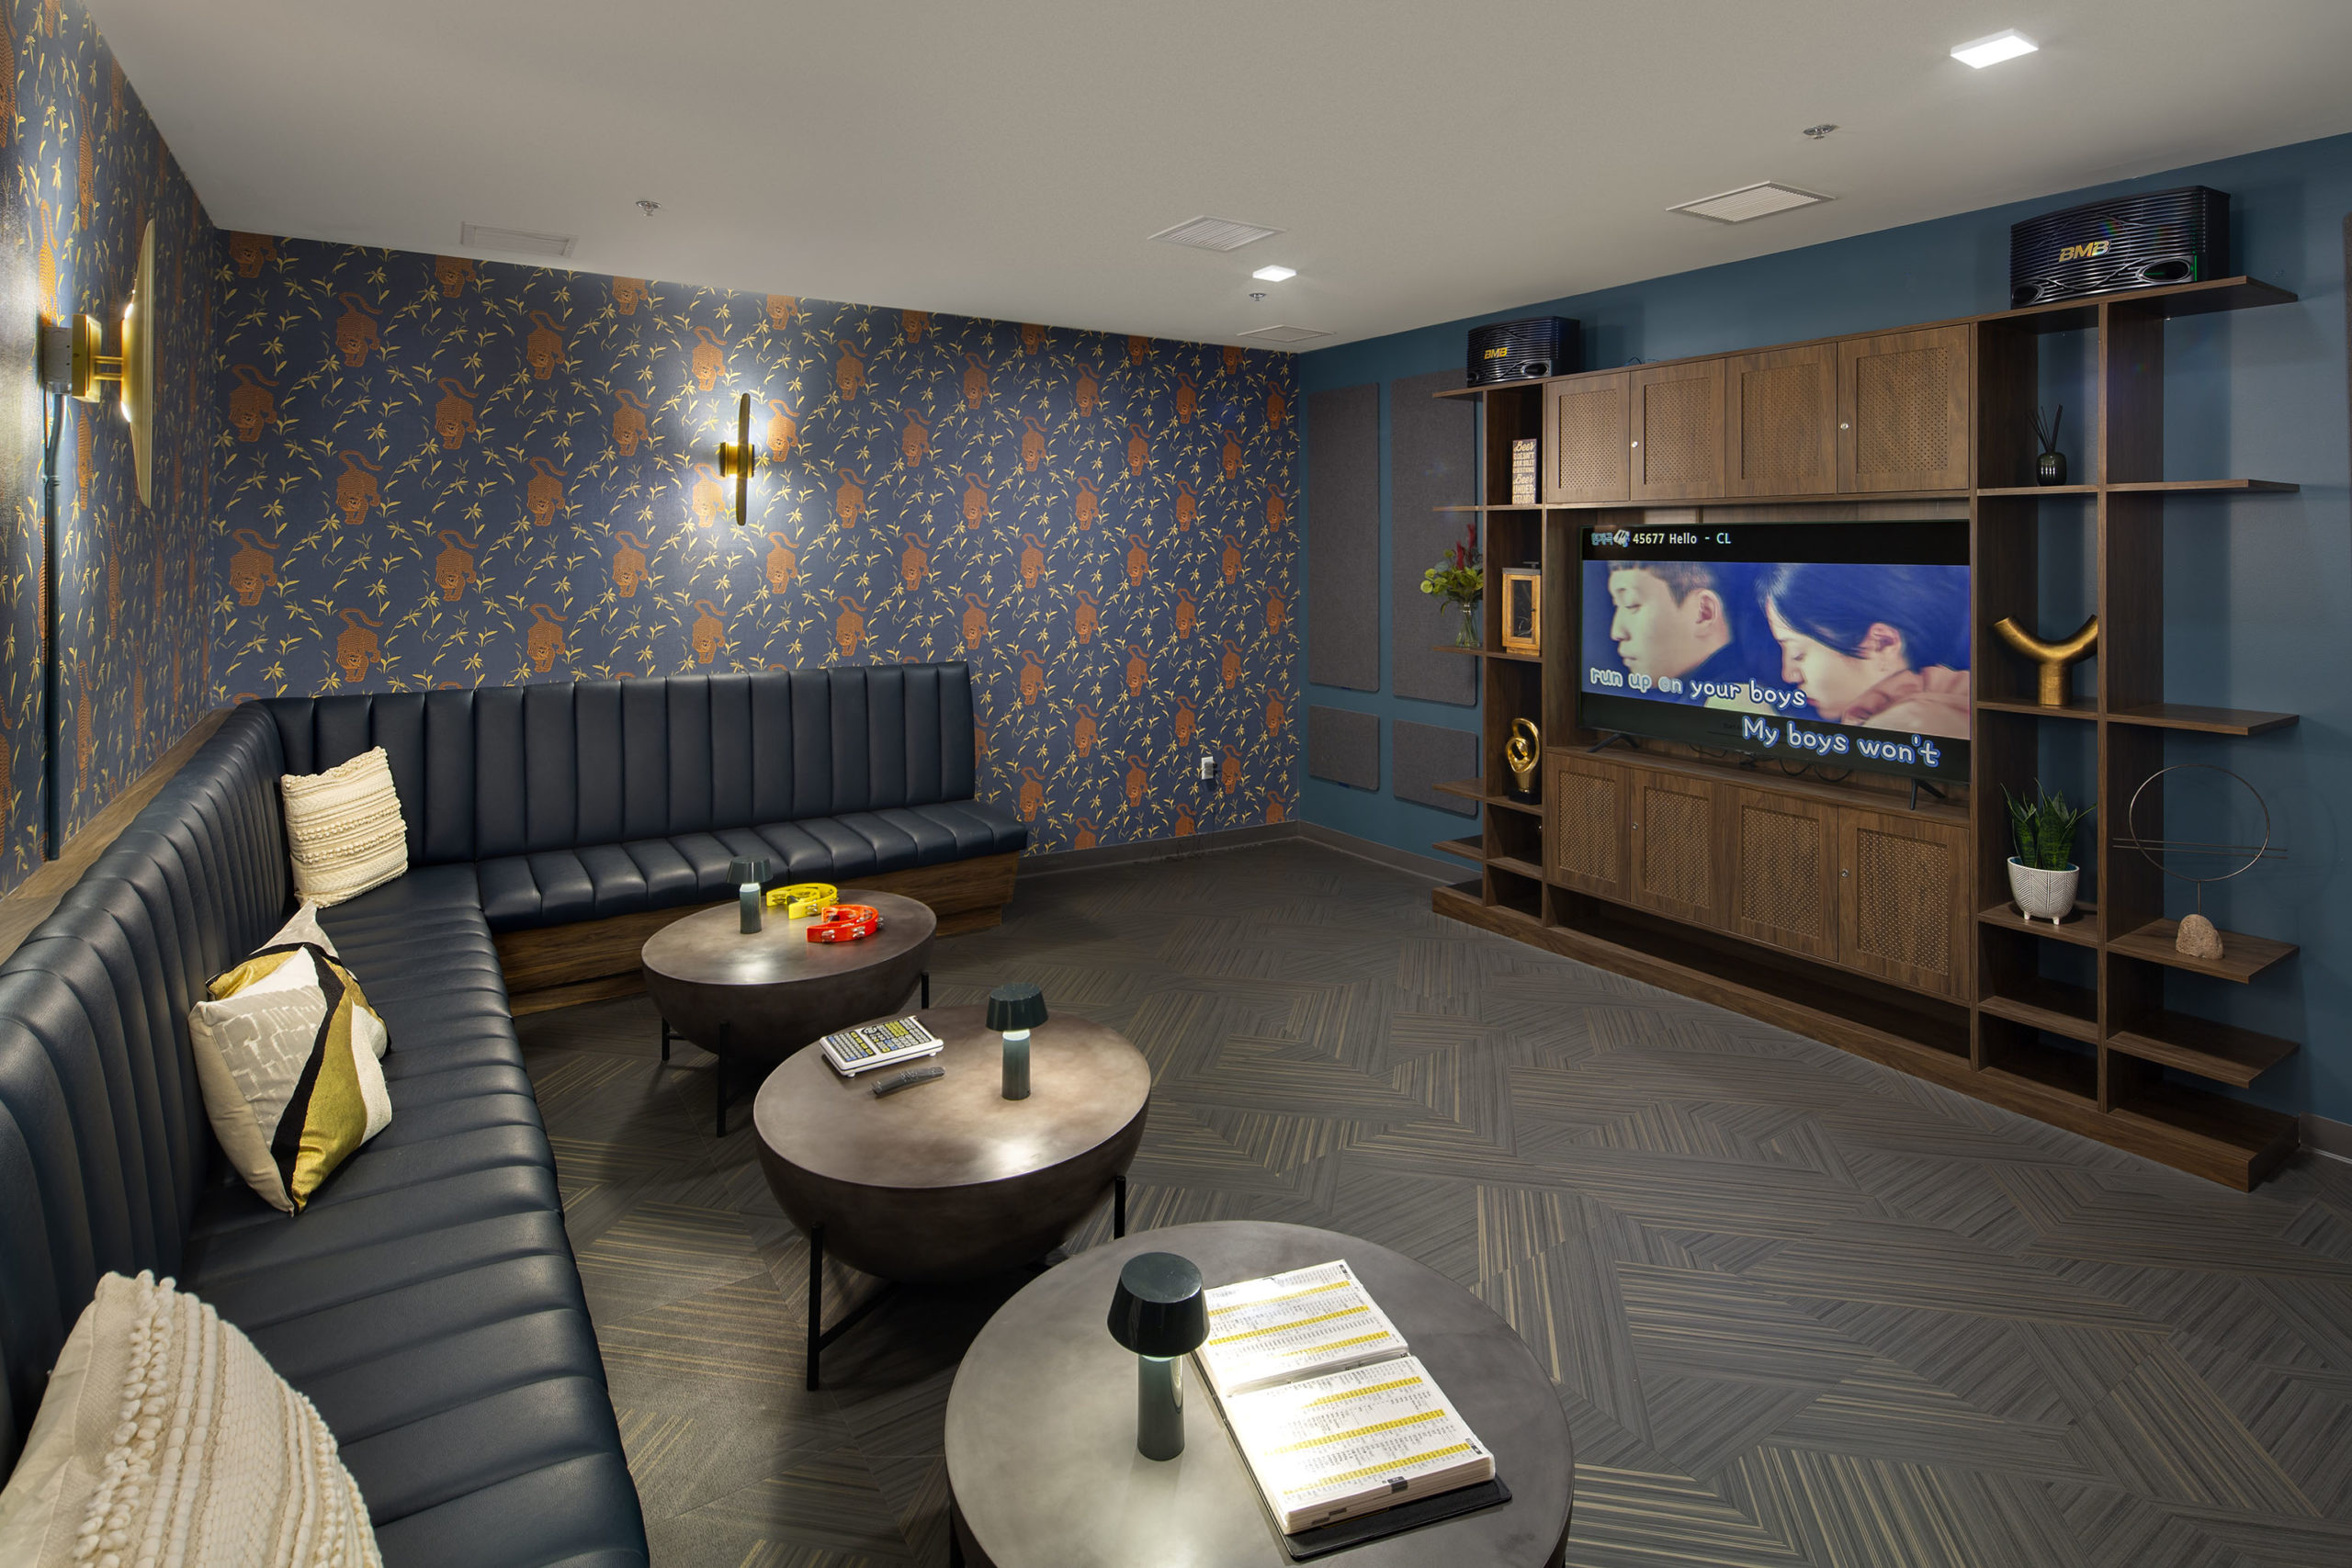 Crosby Apartments resident amenity - Resident lounge with bench seating, tables and big screen TV